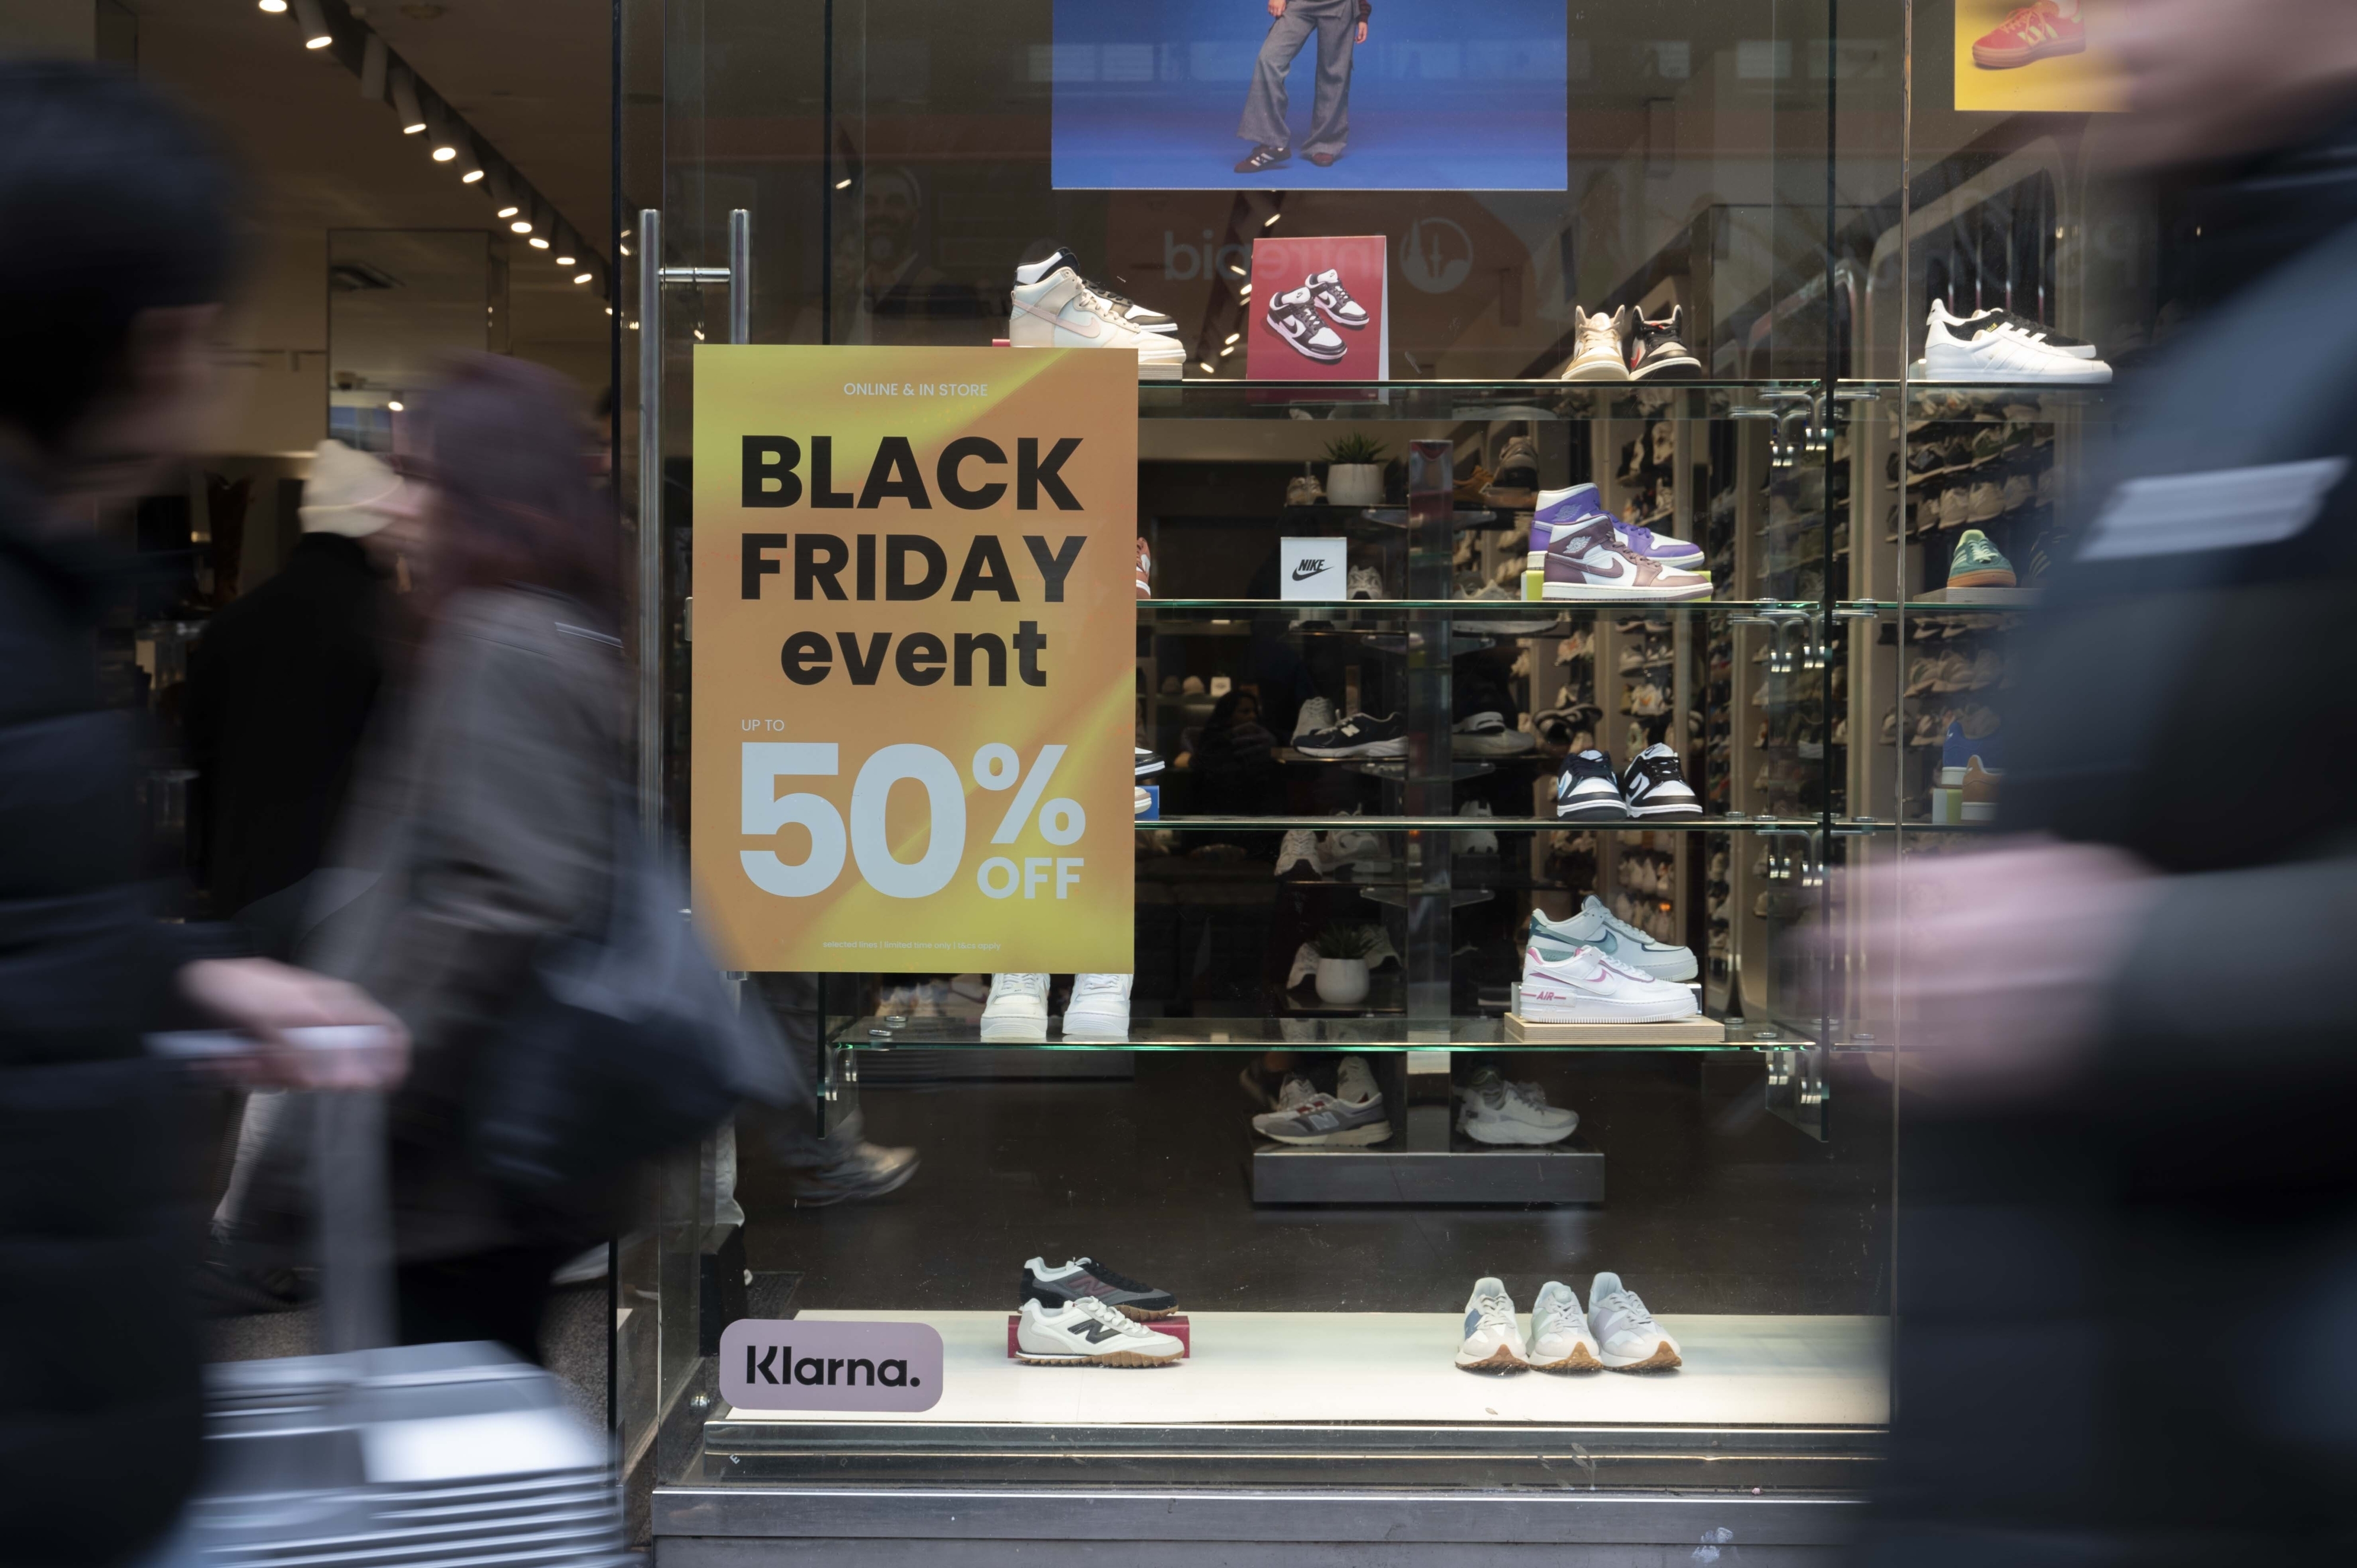 store window sign advertising black friday event 50% off